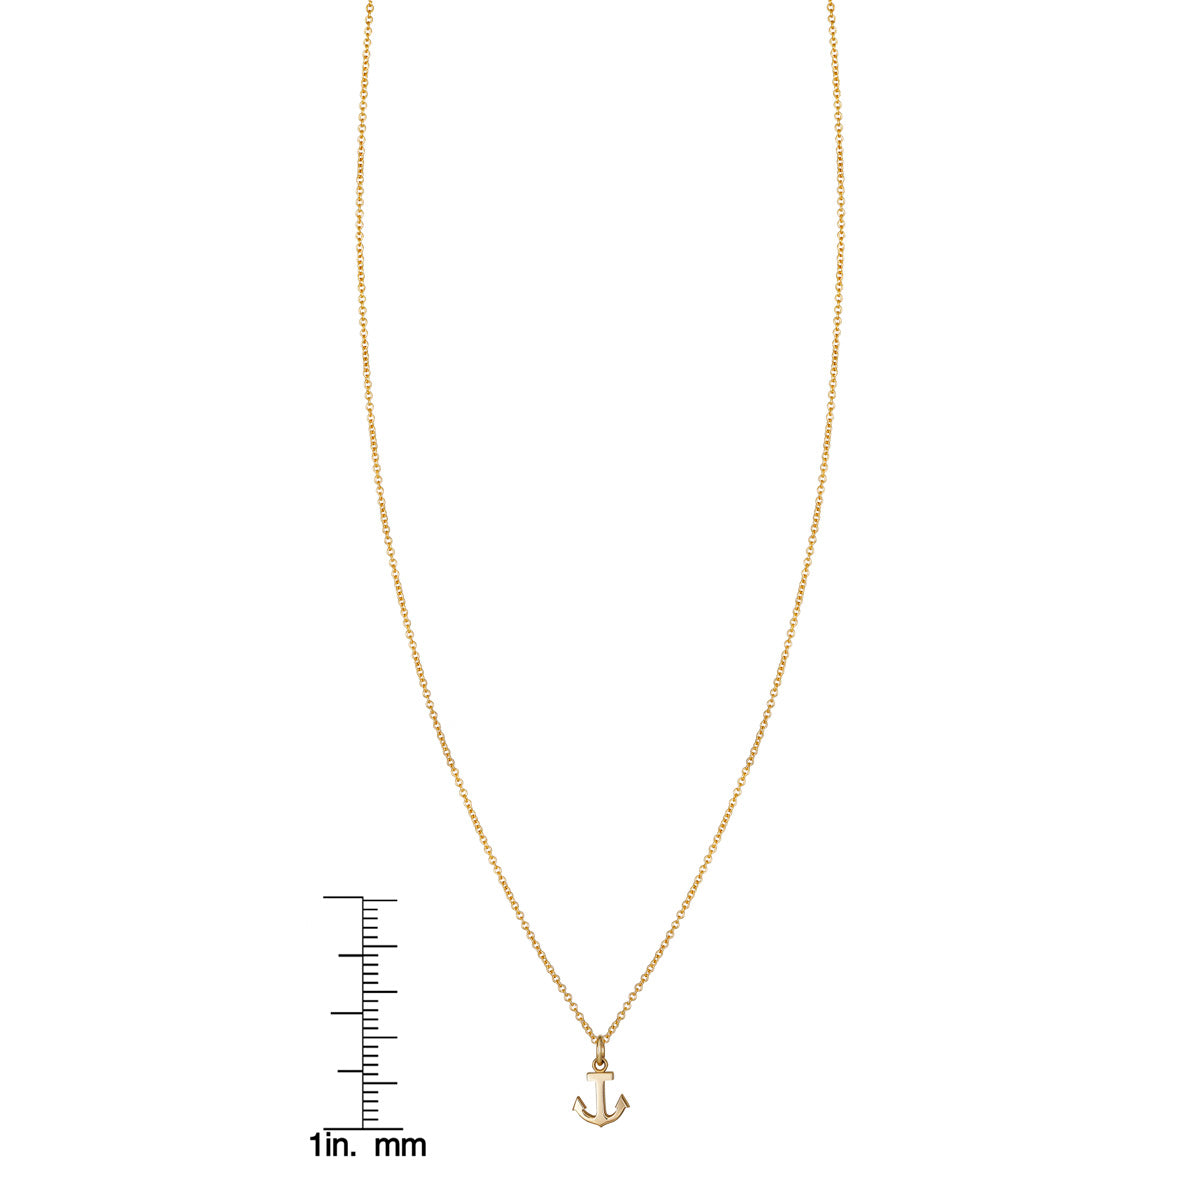 Tiny Gold Anchor Charm Necklace